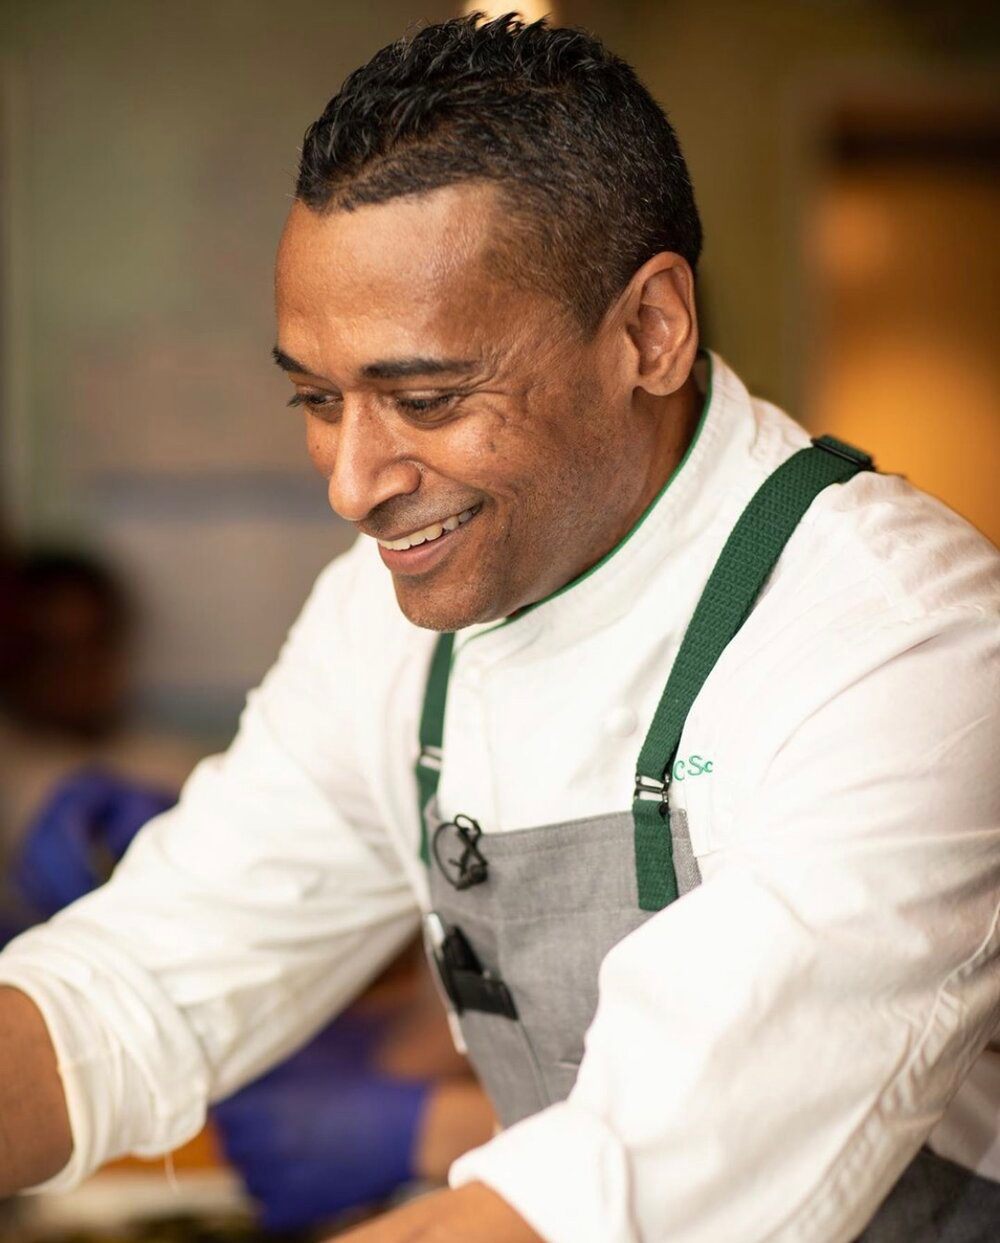 At Chris Scott's restaurant Butterfunk Biscuit Co., he cooks dishes inspired by the Amish soul food of his childhood.